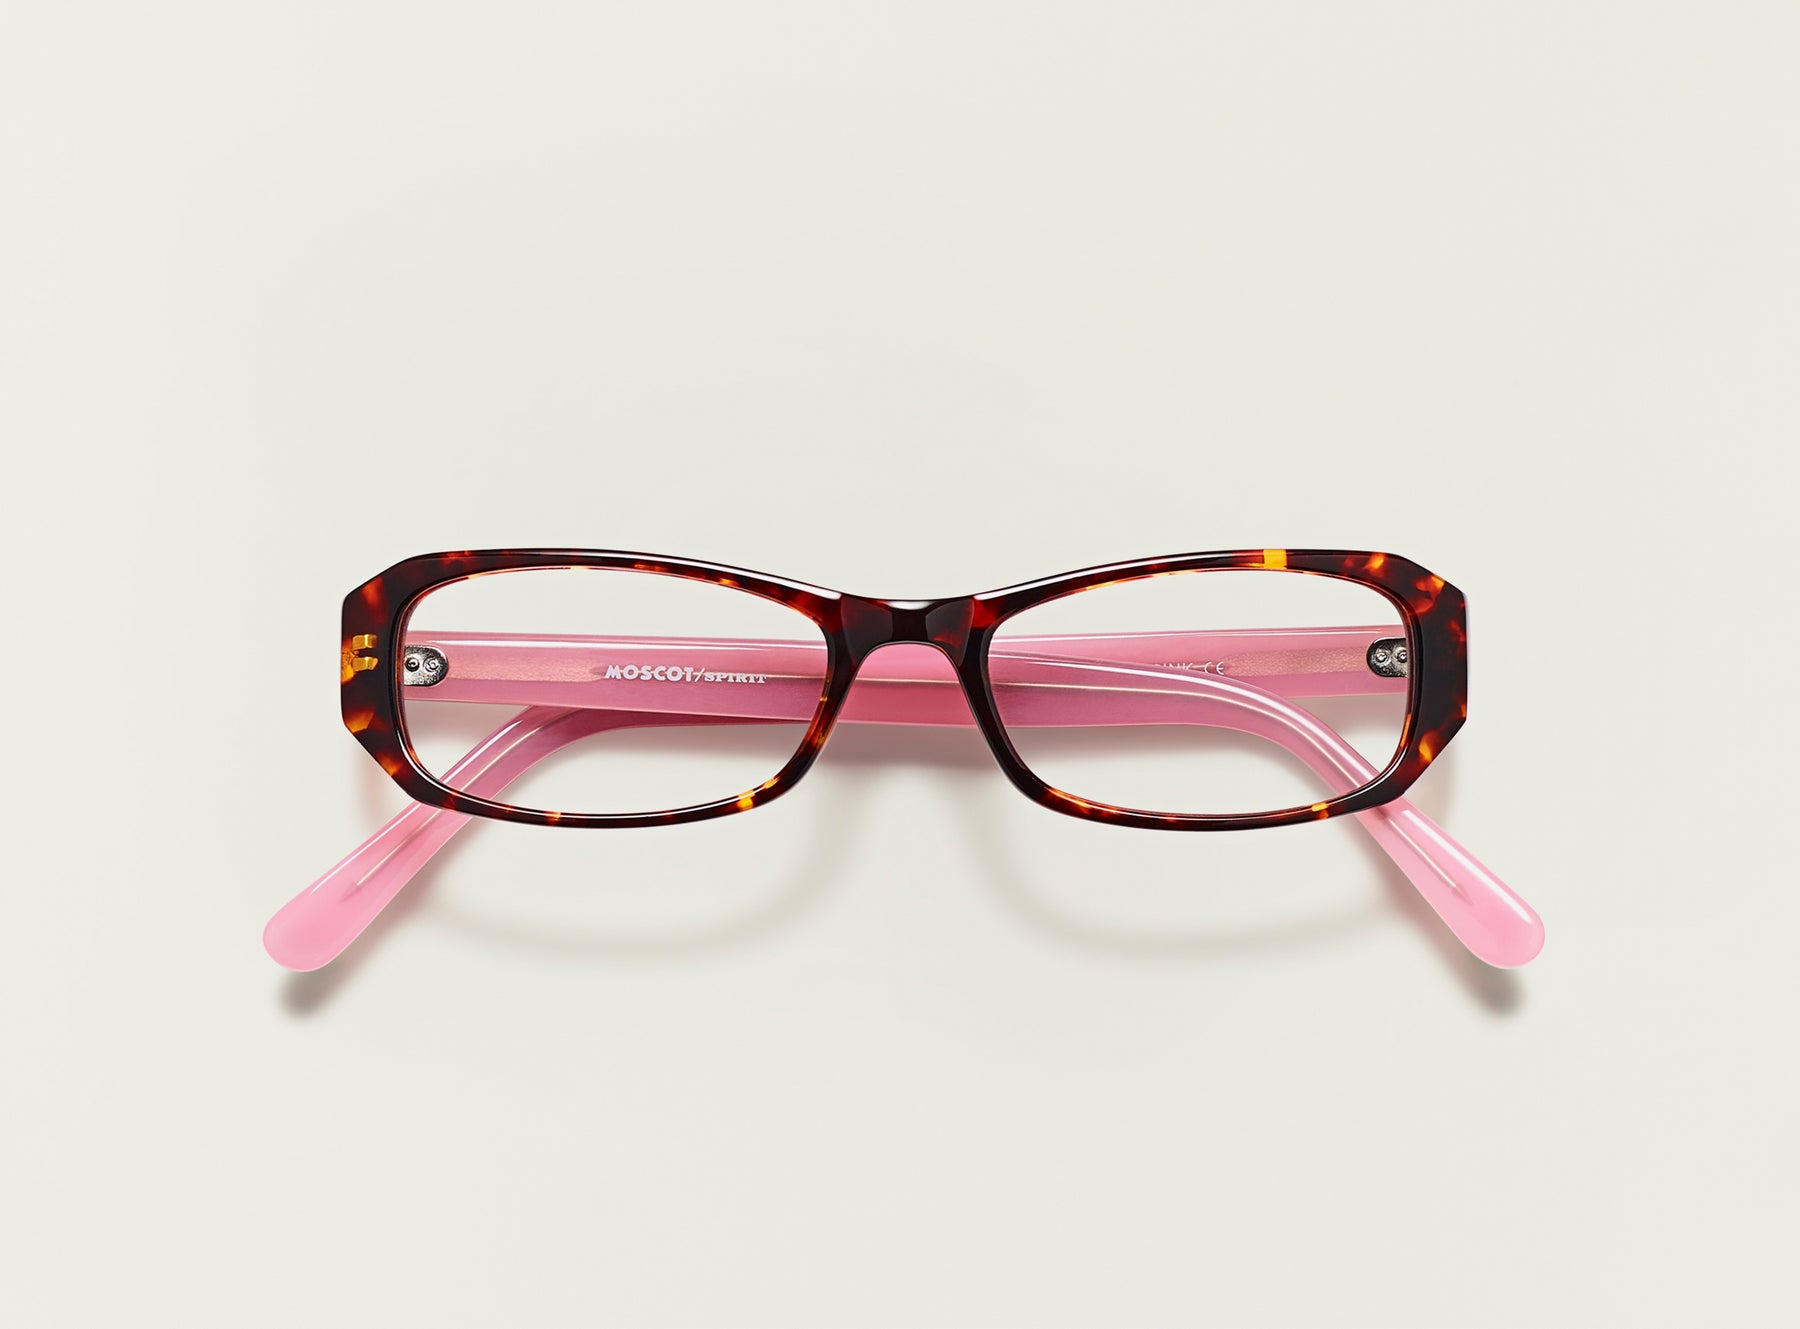 The SAJA READY READER in Tortoise/Pink